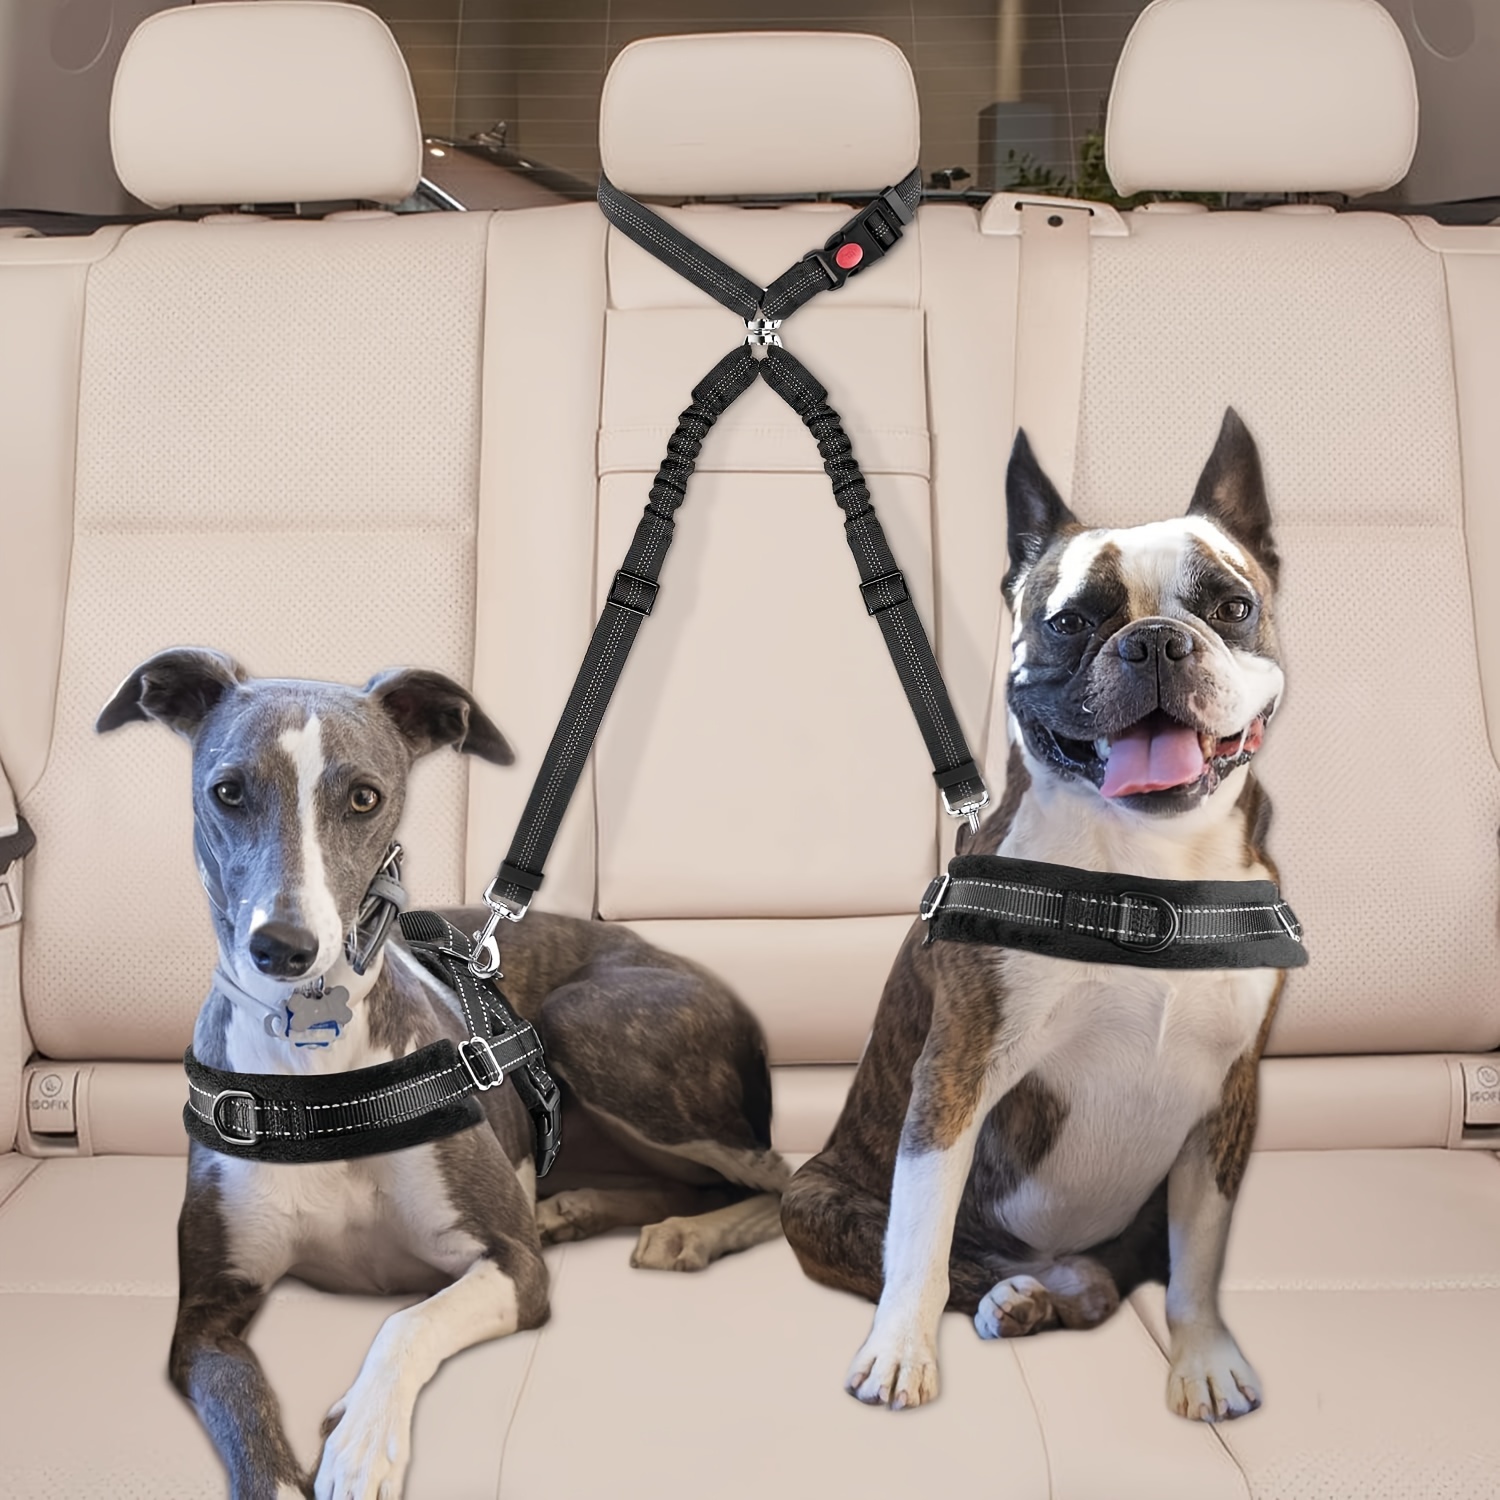 

Dog Seat Belt, Dog Seatbelt Harness With Adjustable Metal Buckle, Elastic Bungee Reflective Vehicle Car Headrest Restraint Tether For Small Medium Large Dogs Pet